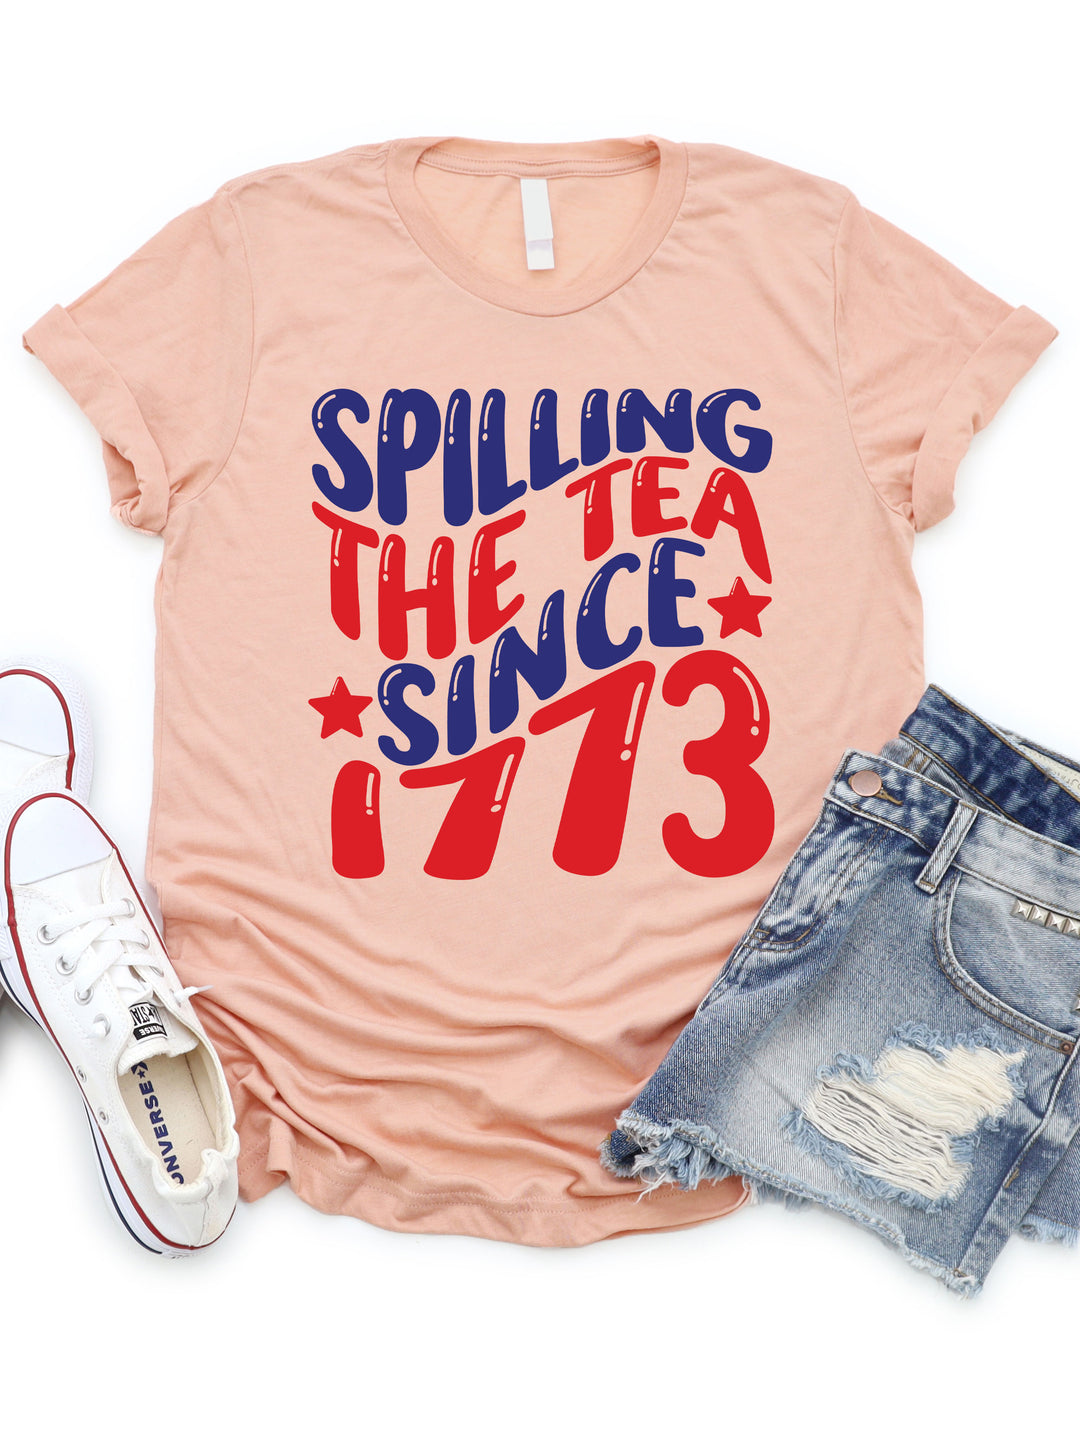 Spilling The Tea Since 1773 Graphic Tee